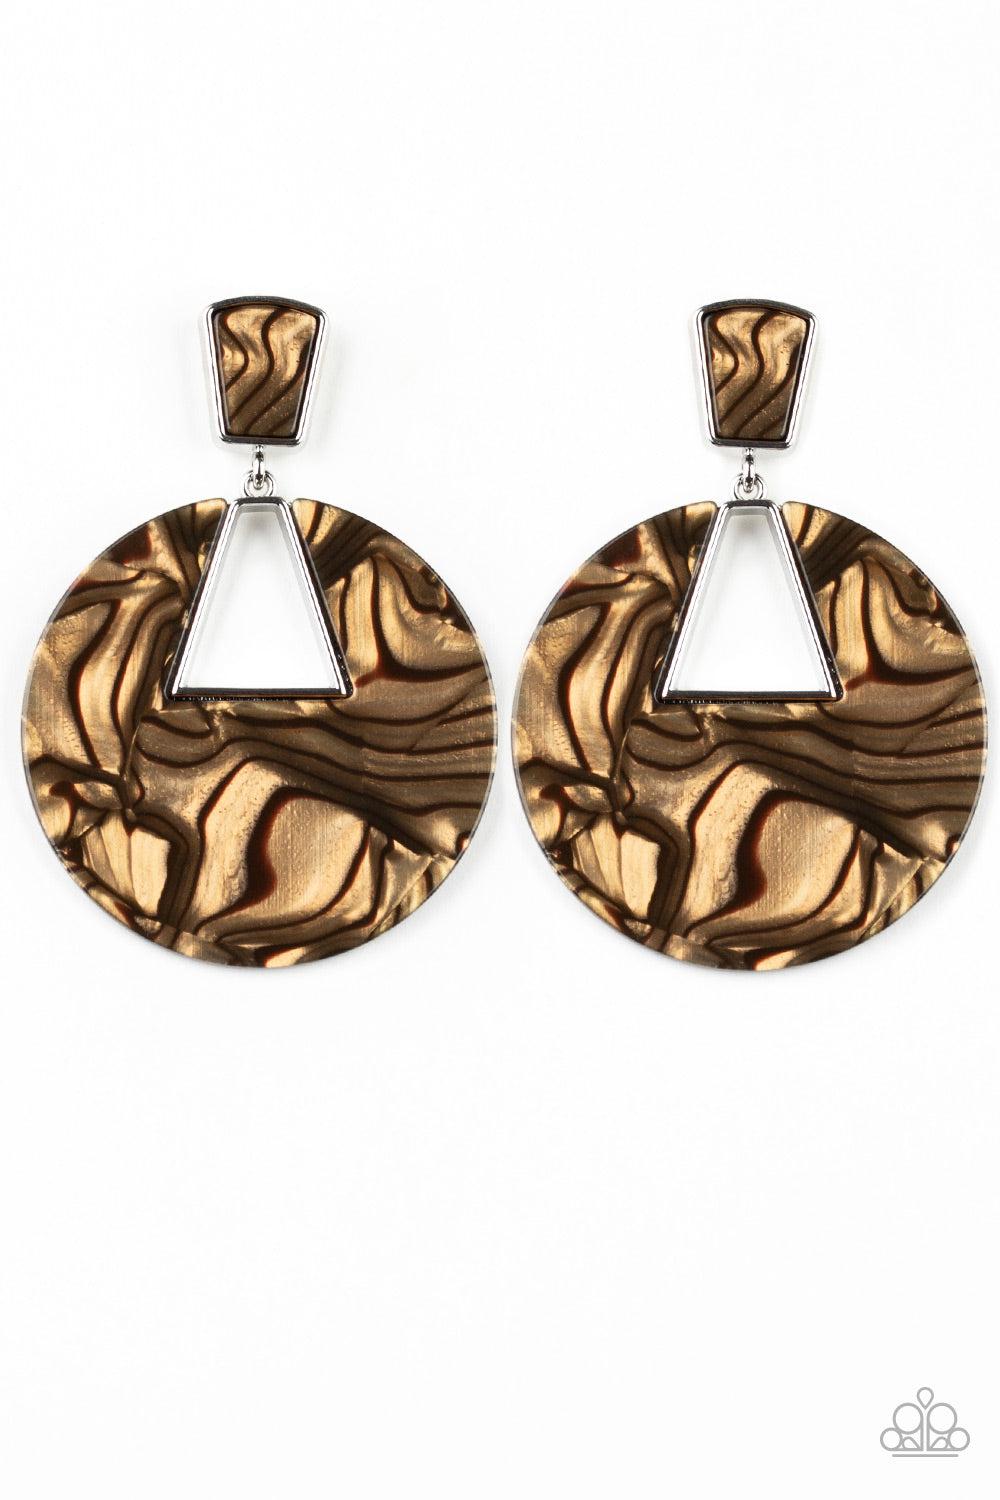 Let HEIR Rip! Brown Acrylic Earrings - Paparazzi Accessories- lightbox - CarasShop.com - $5 Jewelry by Cara Jewels